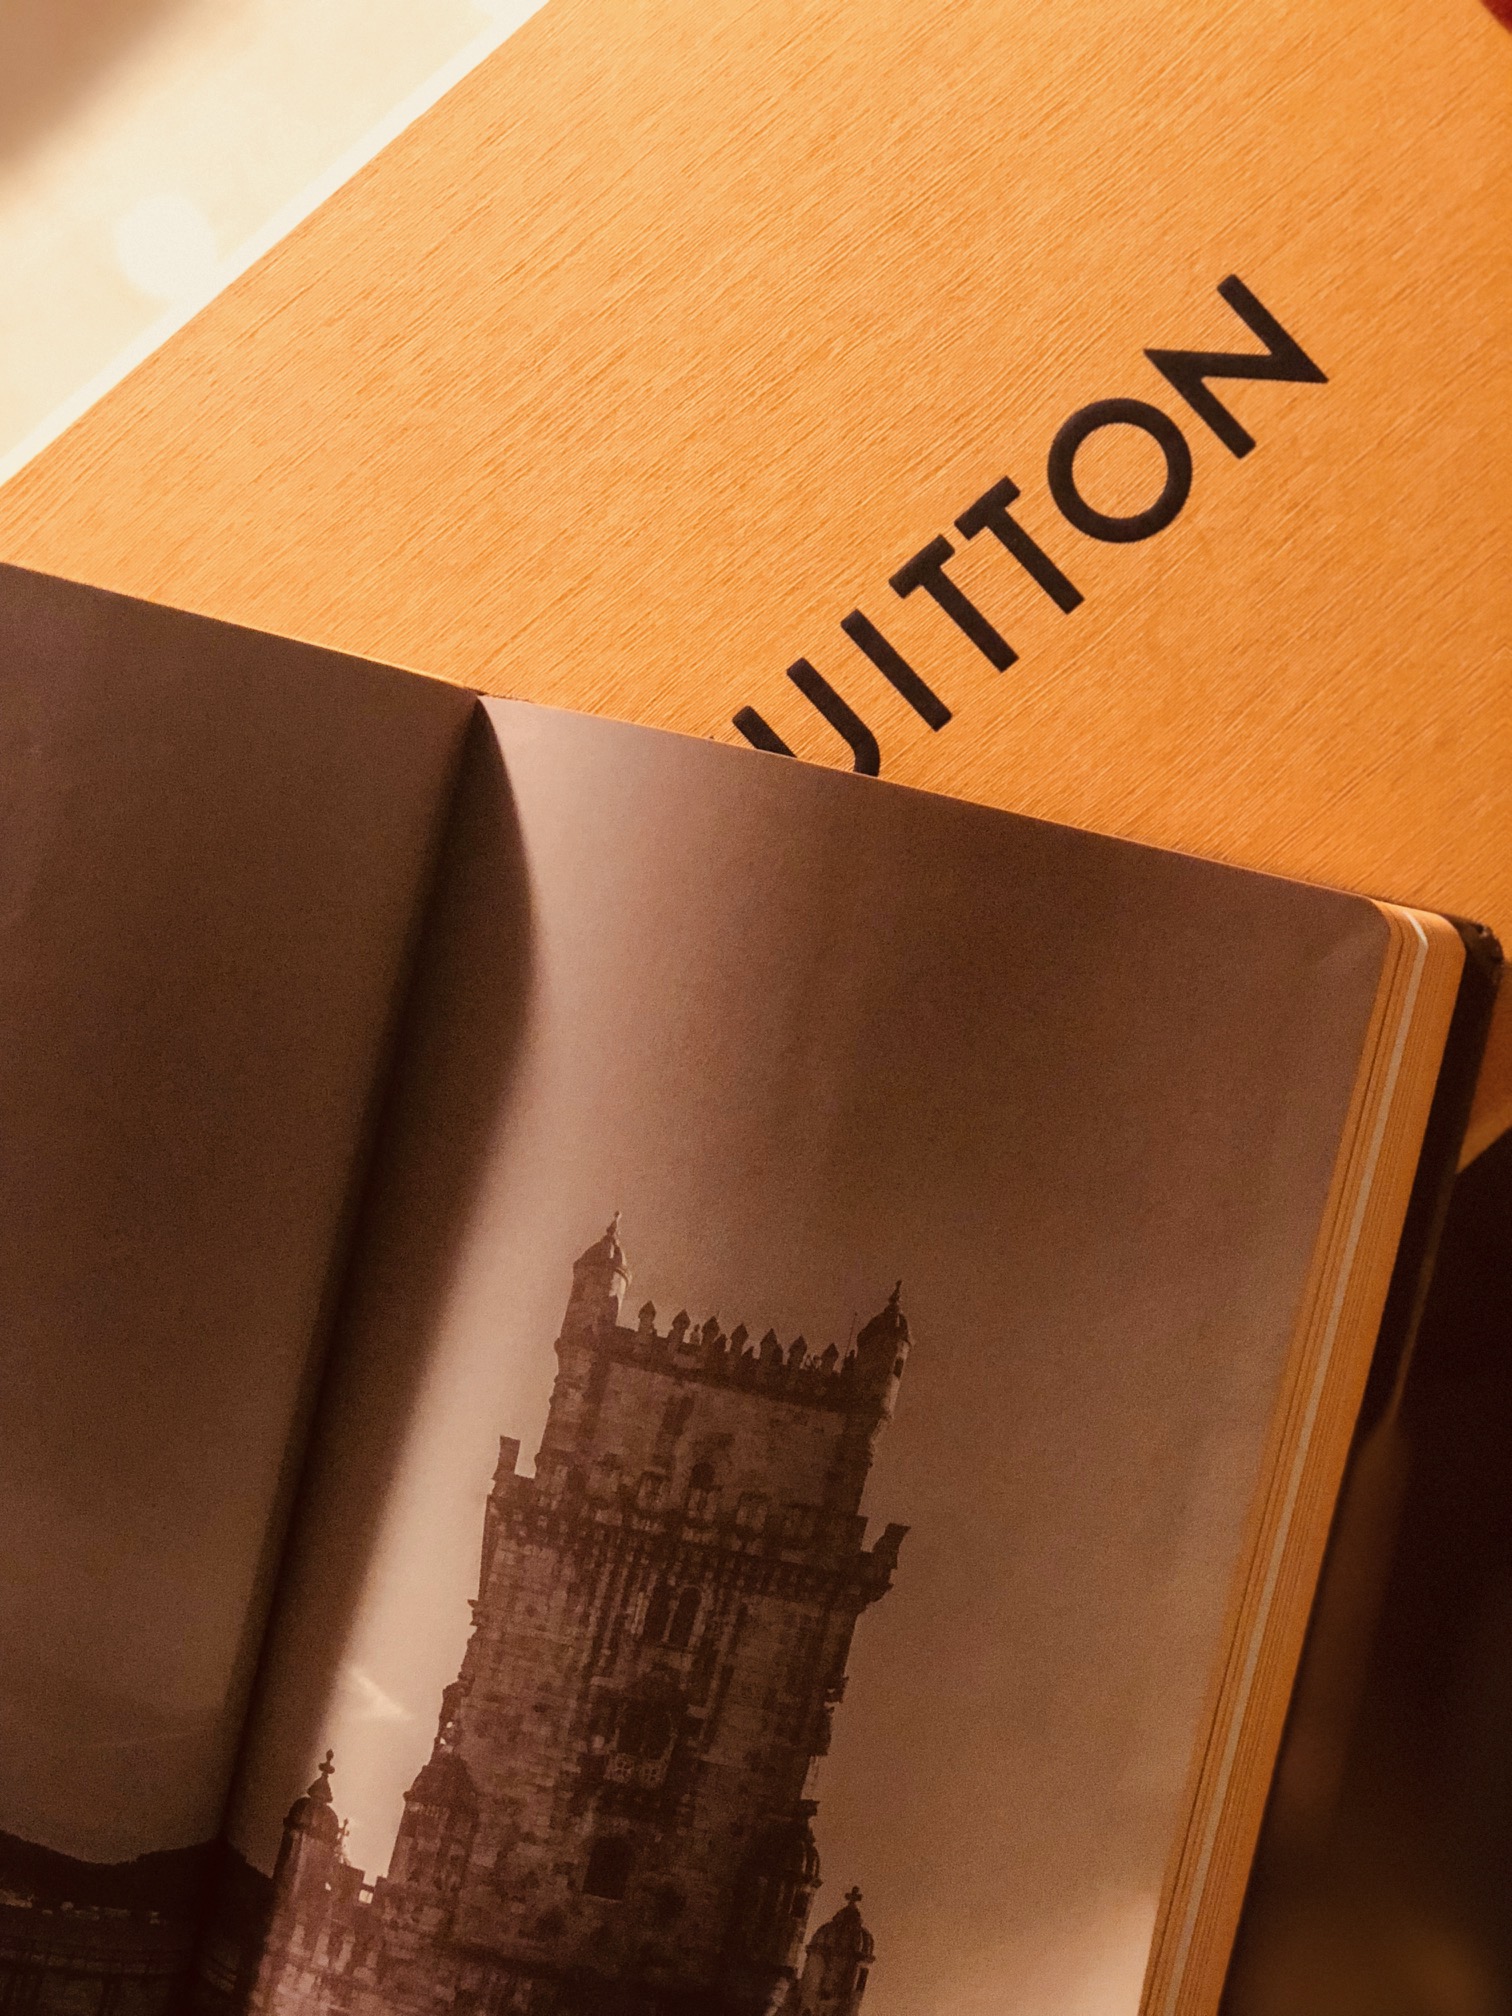 Louis Vuitton has added Amsterdam, Lisbon, San Francisco and Taipei to its  City Guide family